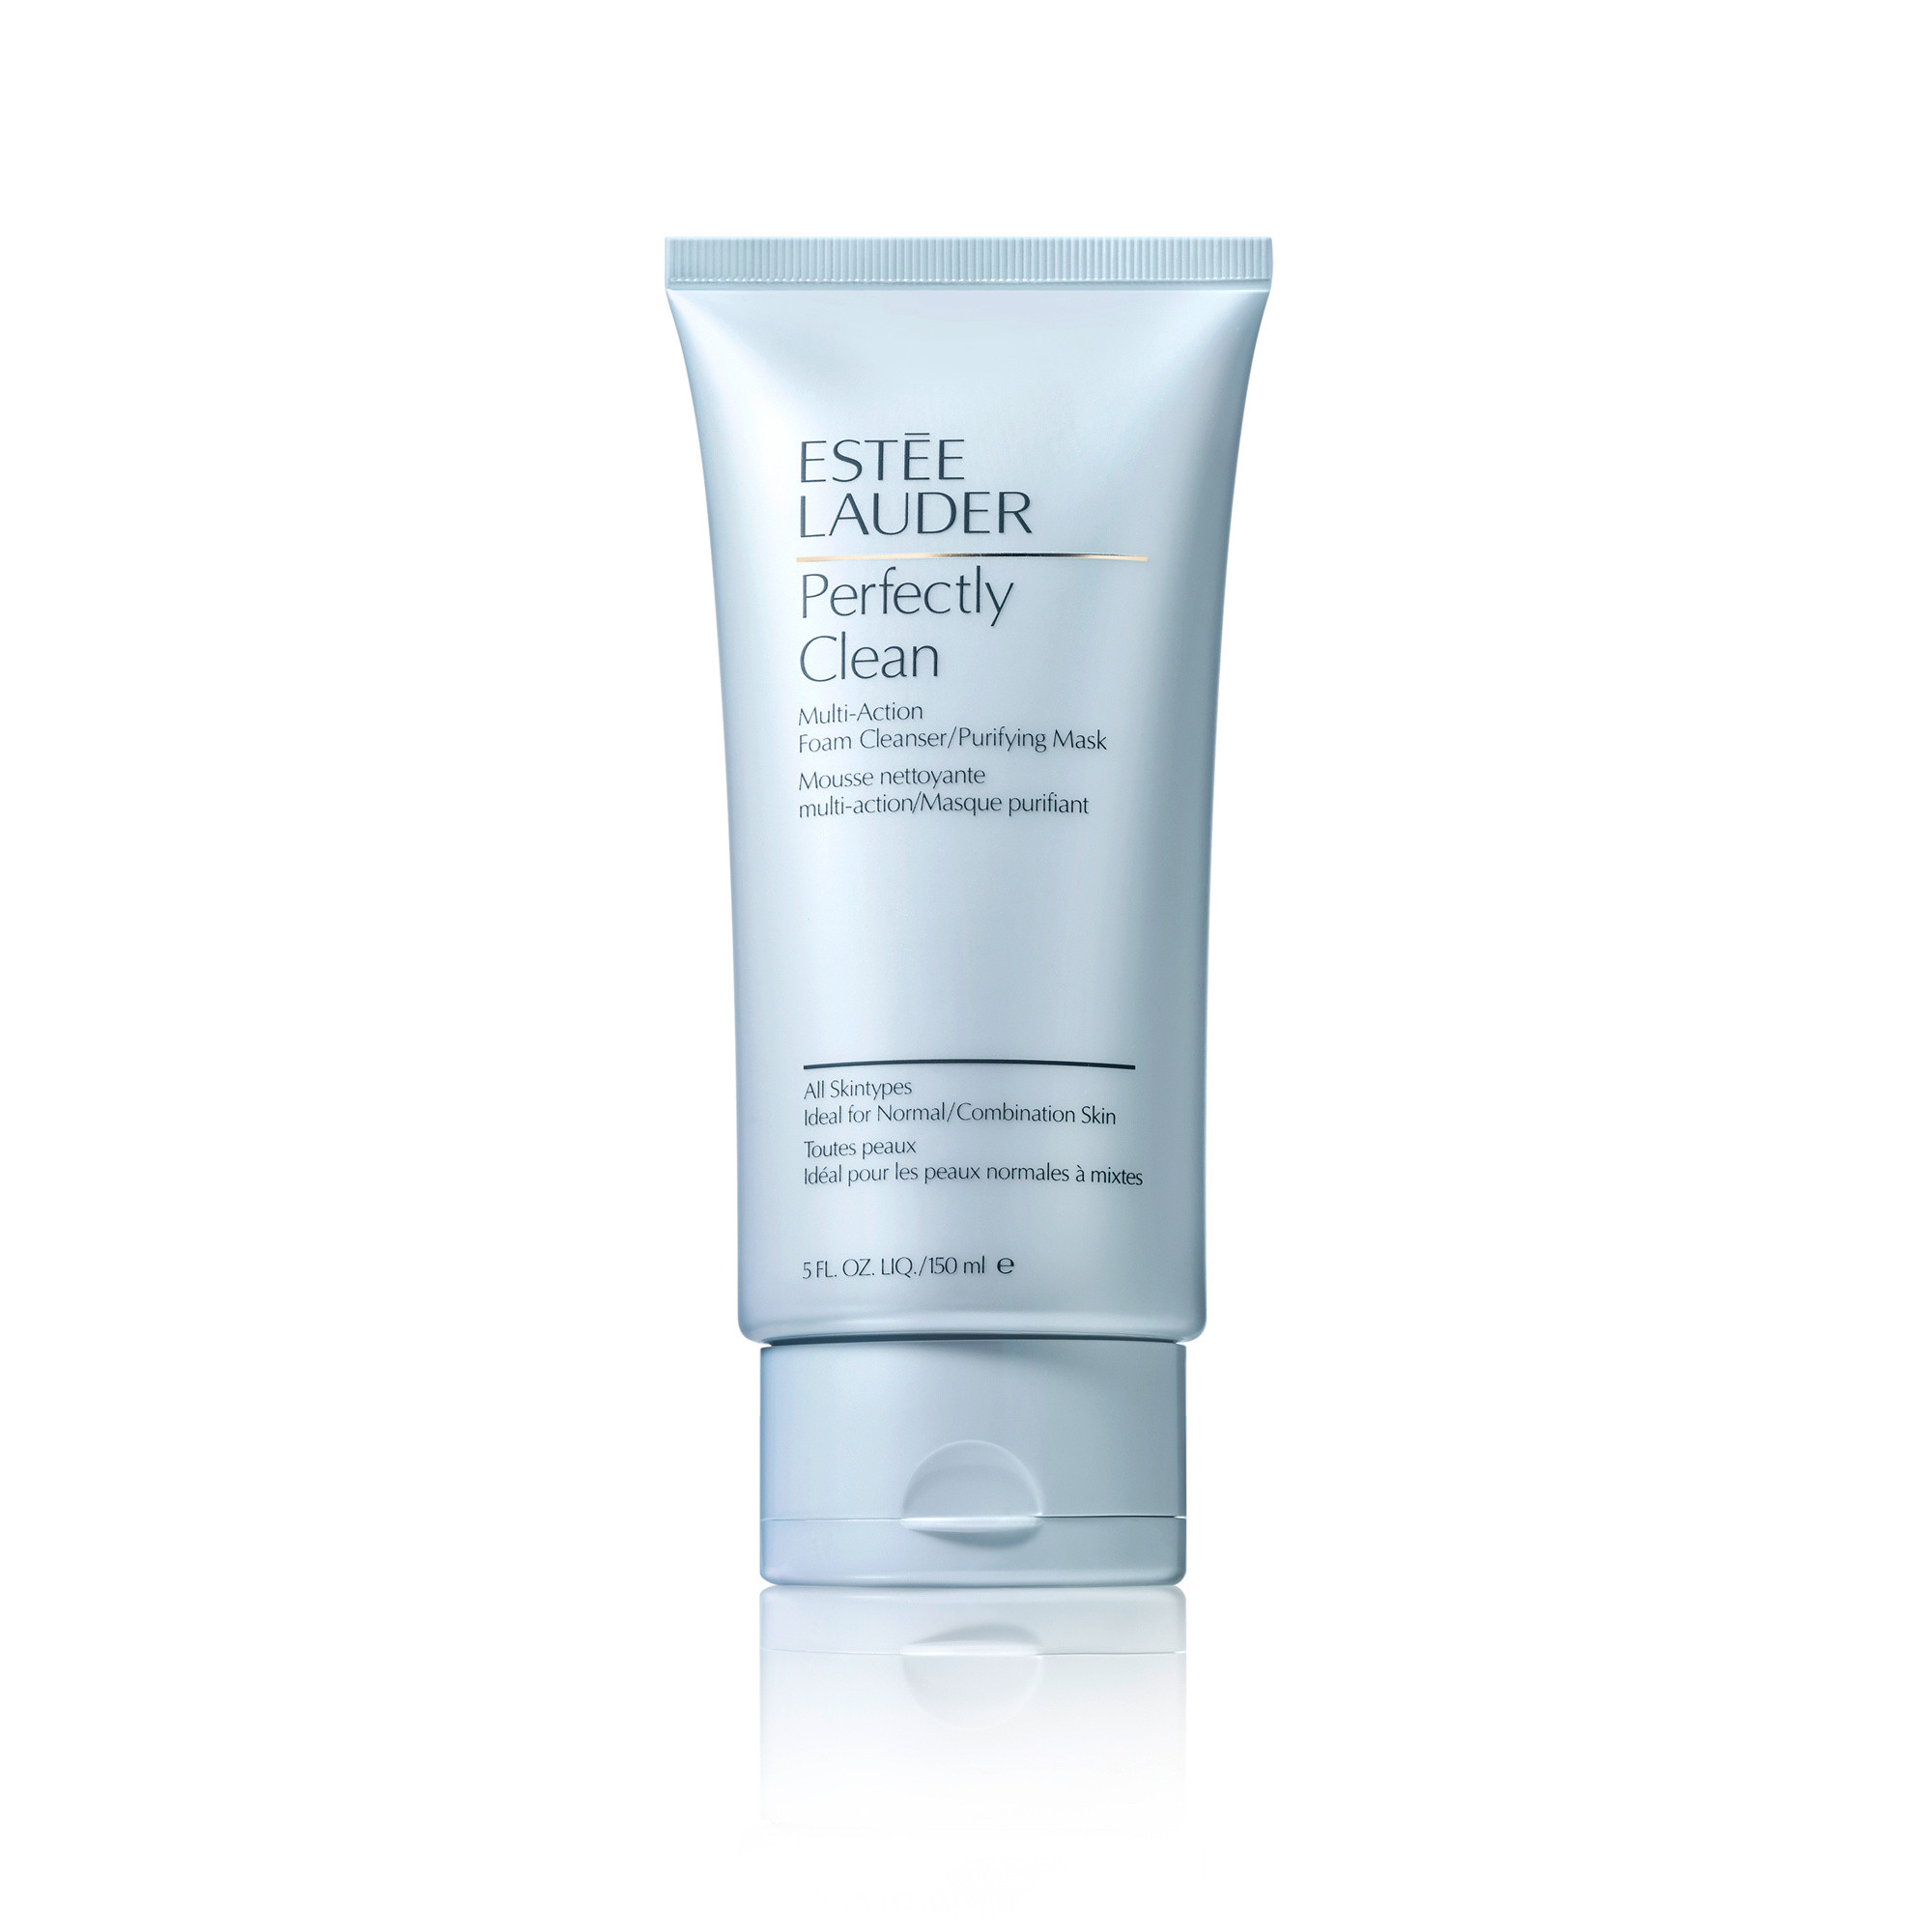 Estée Lauder perfectly clean multi-action foam cleanser/puryfying mask 150 ml, Azzurro, large image number 0